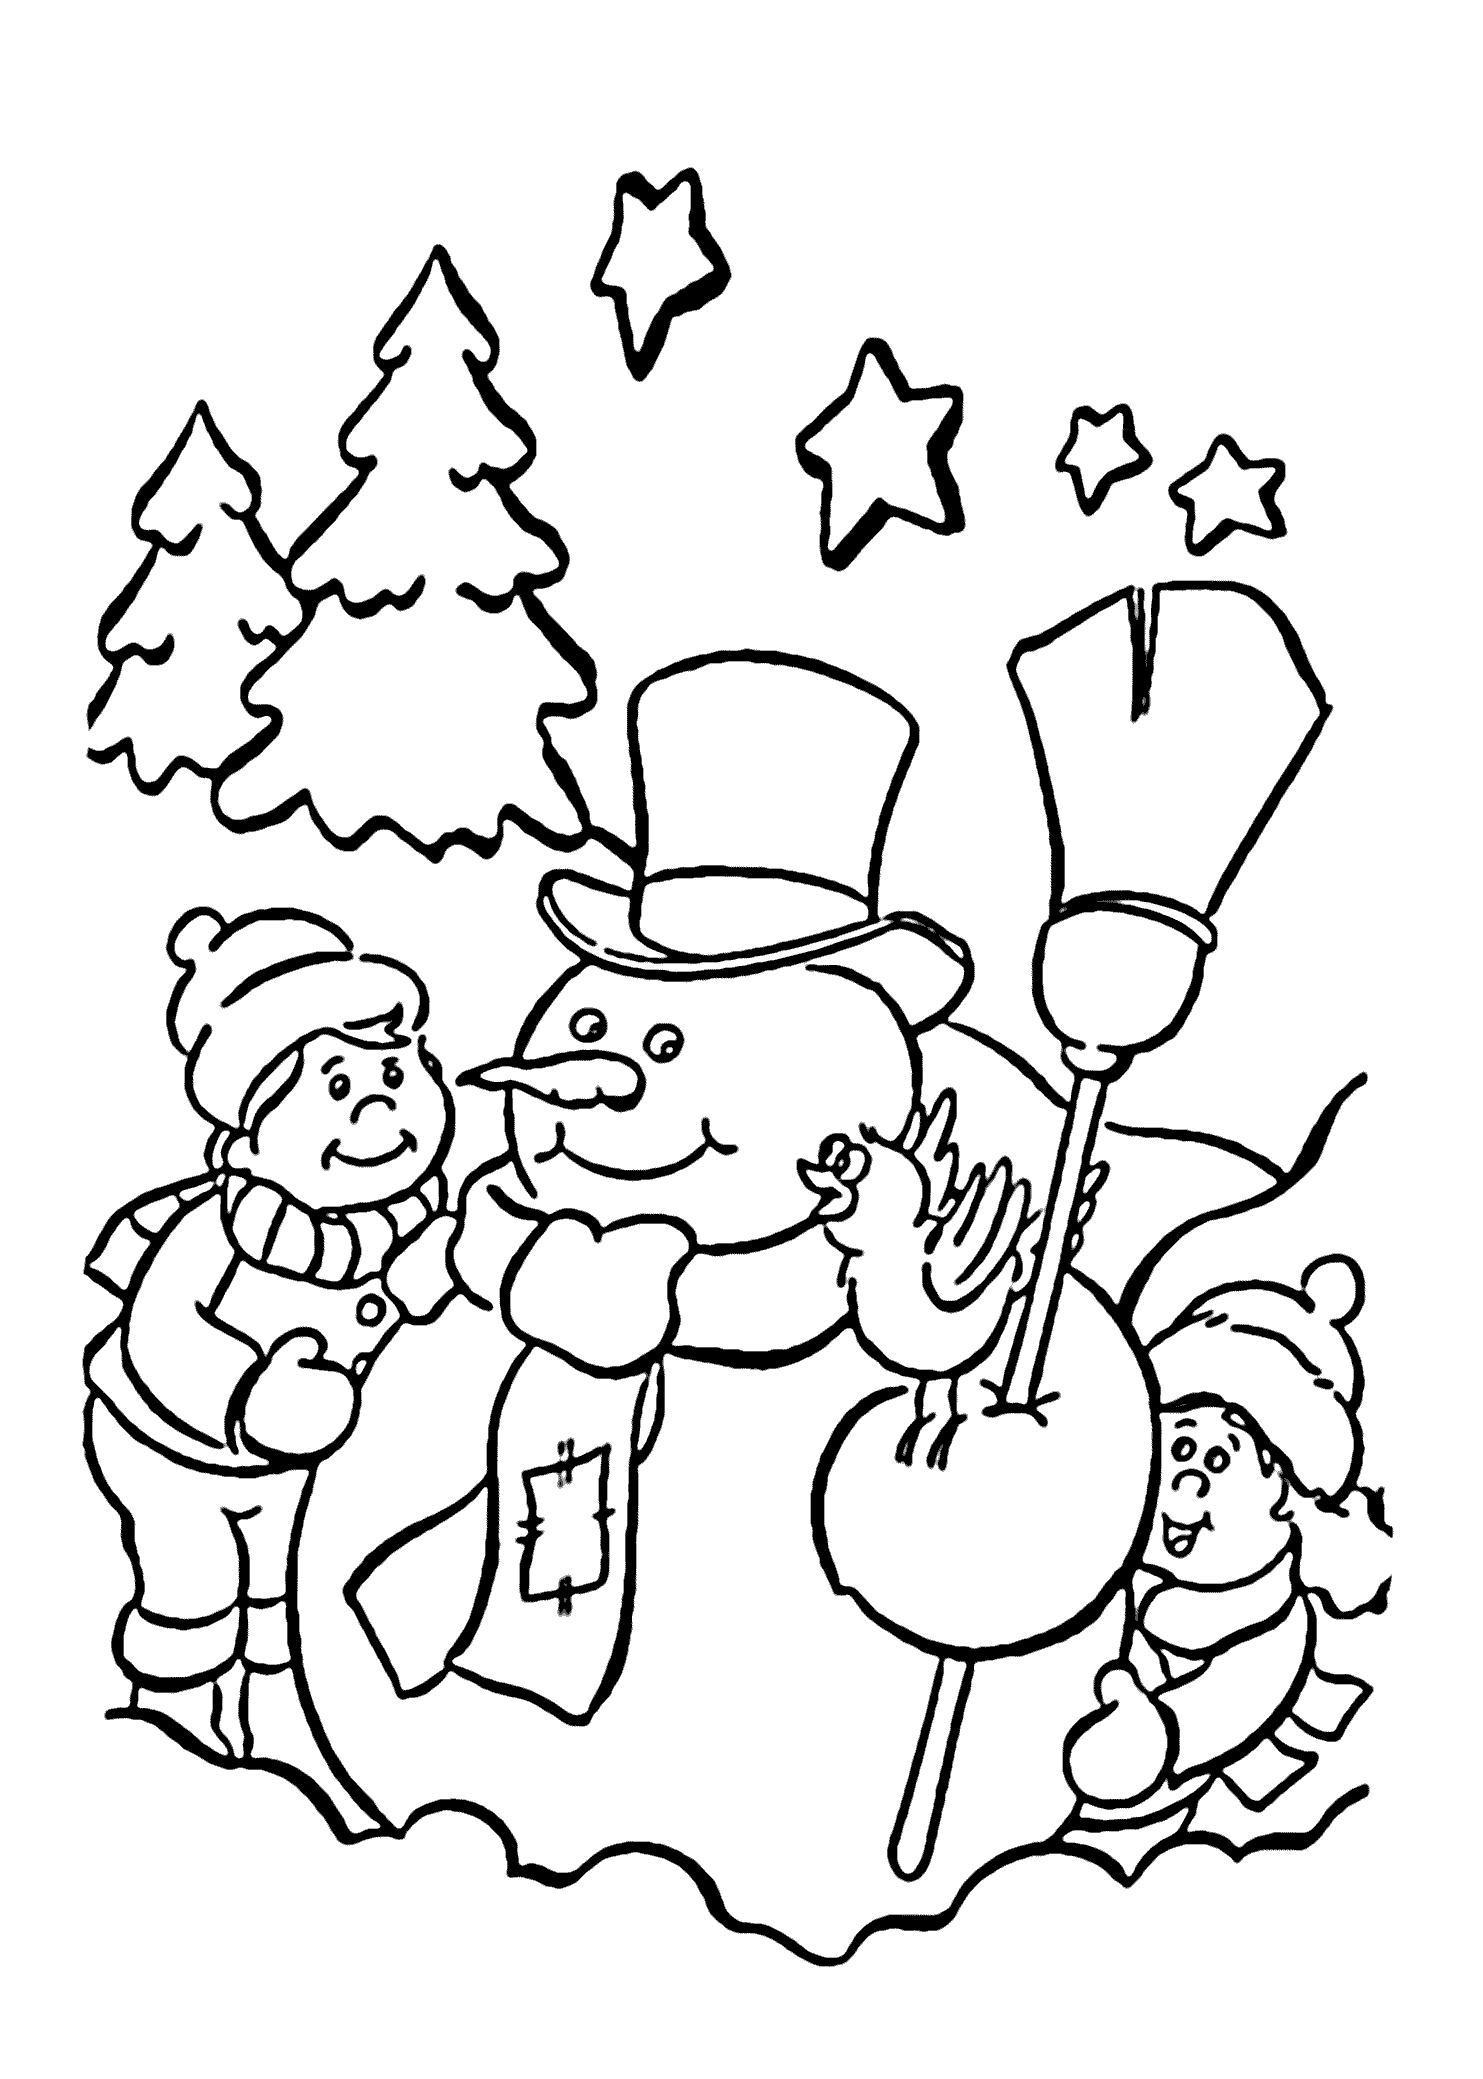 Snowman coloring pages printable for free download